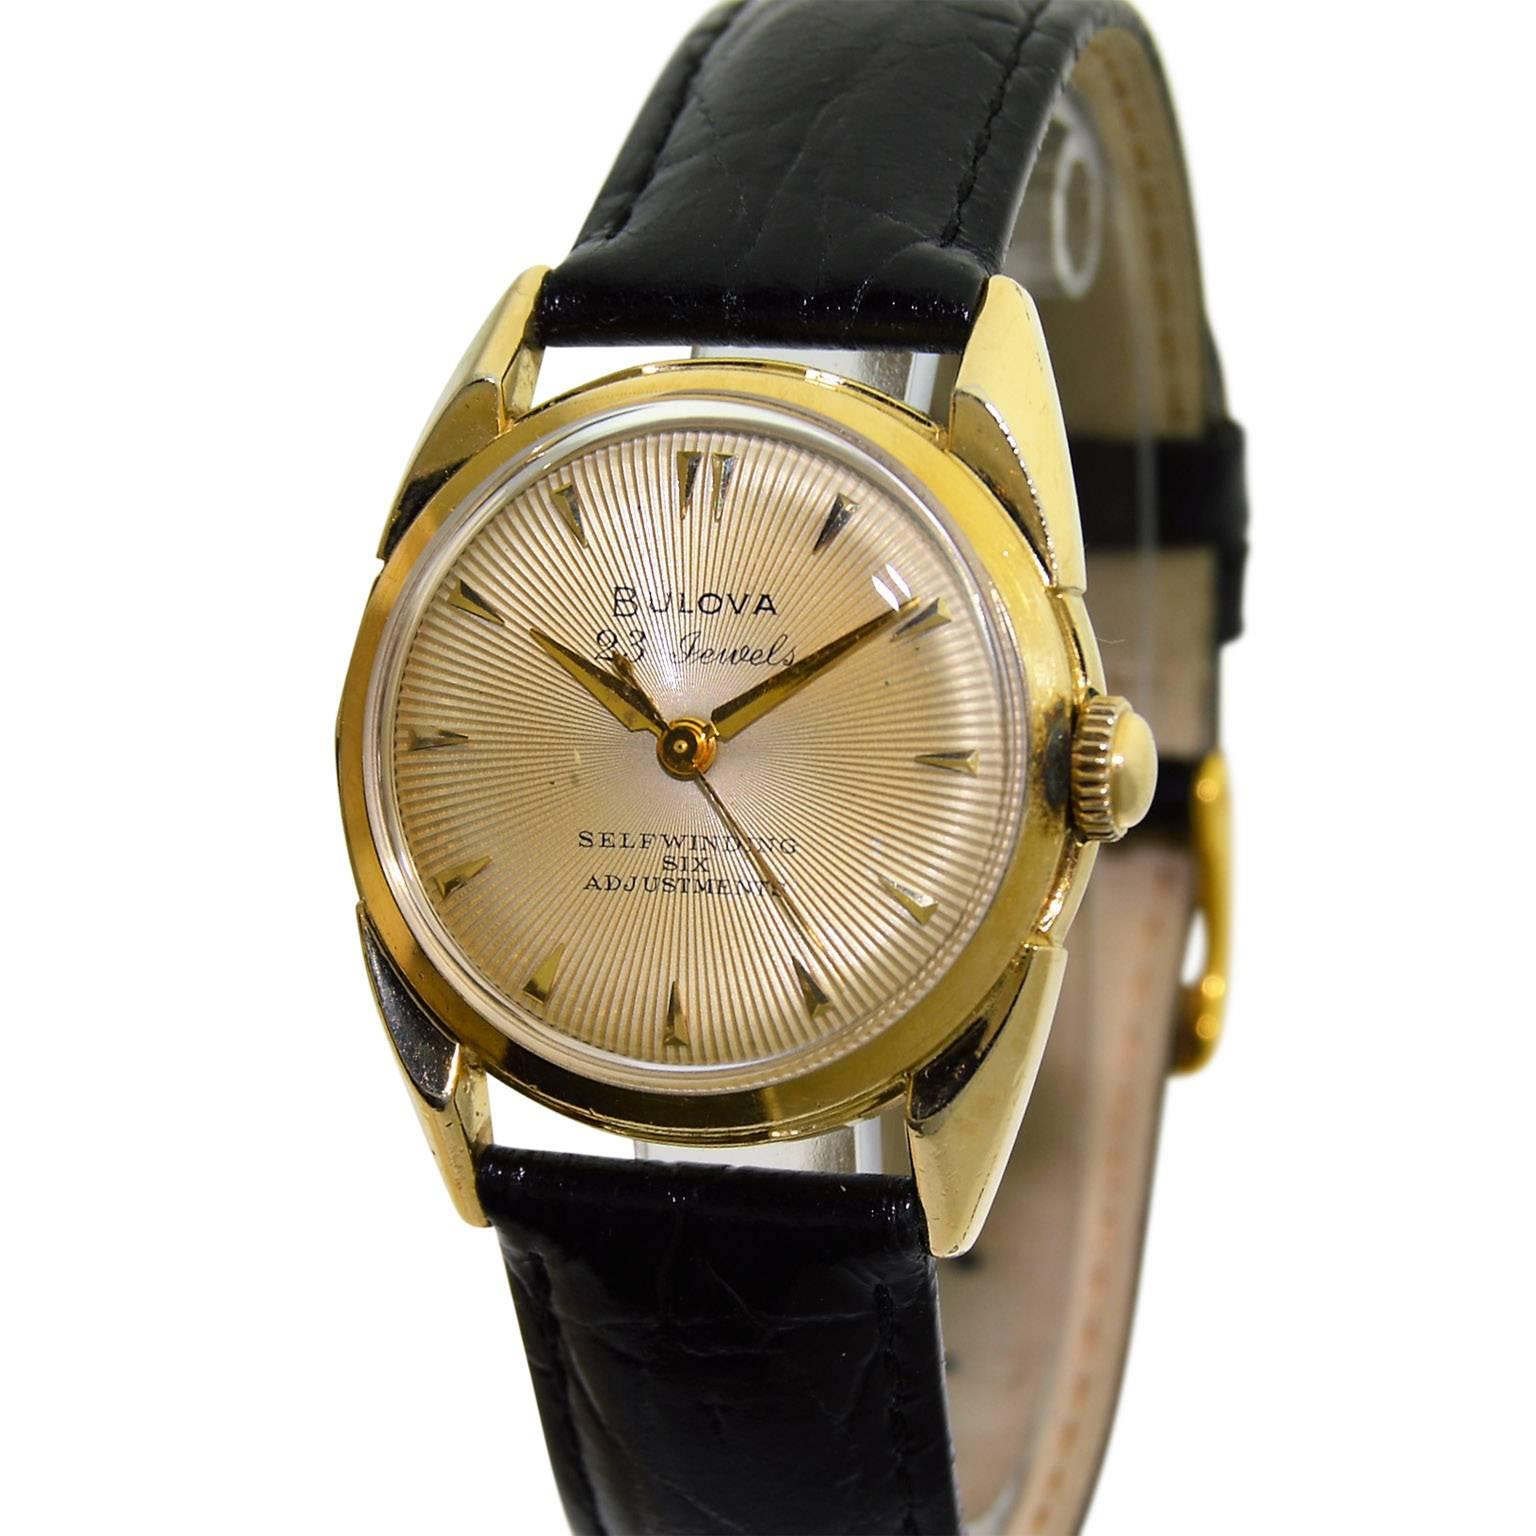 FACTORY / HOUSE: Bulova Watch Company
STYLE / REFERENCE: Art Deco 
METAL / MATERIAL:  14Kt. Yellow Gold Filled
CIRCA: 1960's
DIMENSIONS: 38mm X 31mm
MOVEMENT / CALIBER: Automatic Winding / 23 Jewels 
DIAL / HANDS: Silvered Engine Turned with Applied